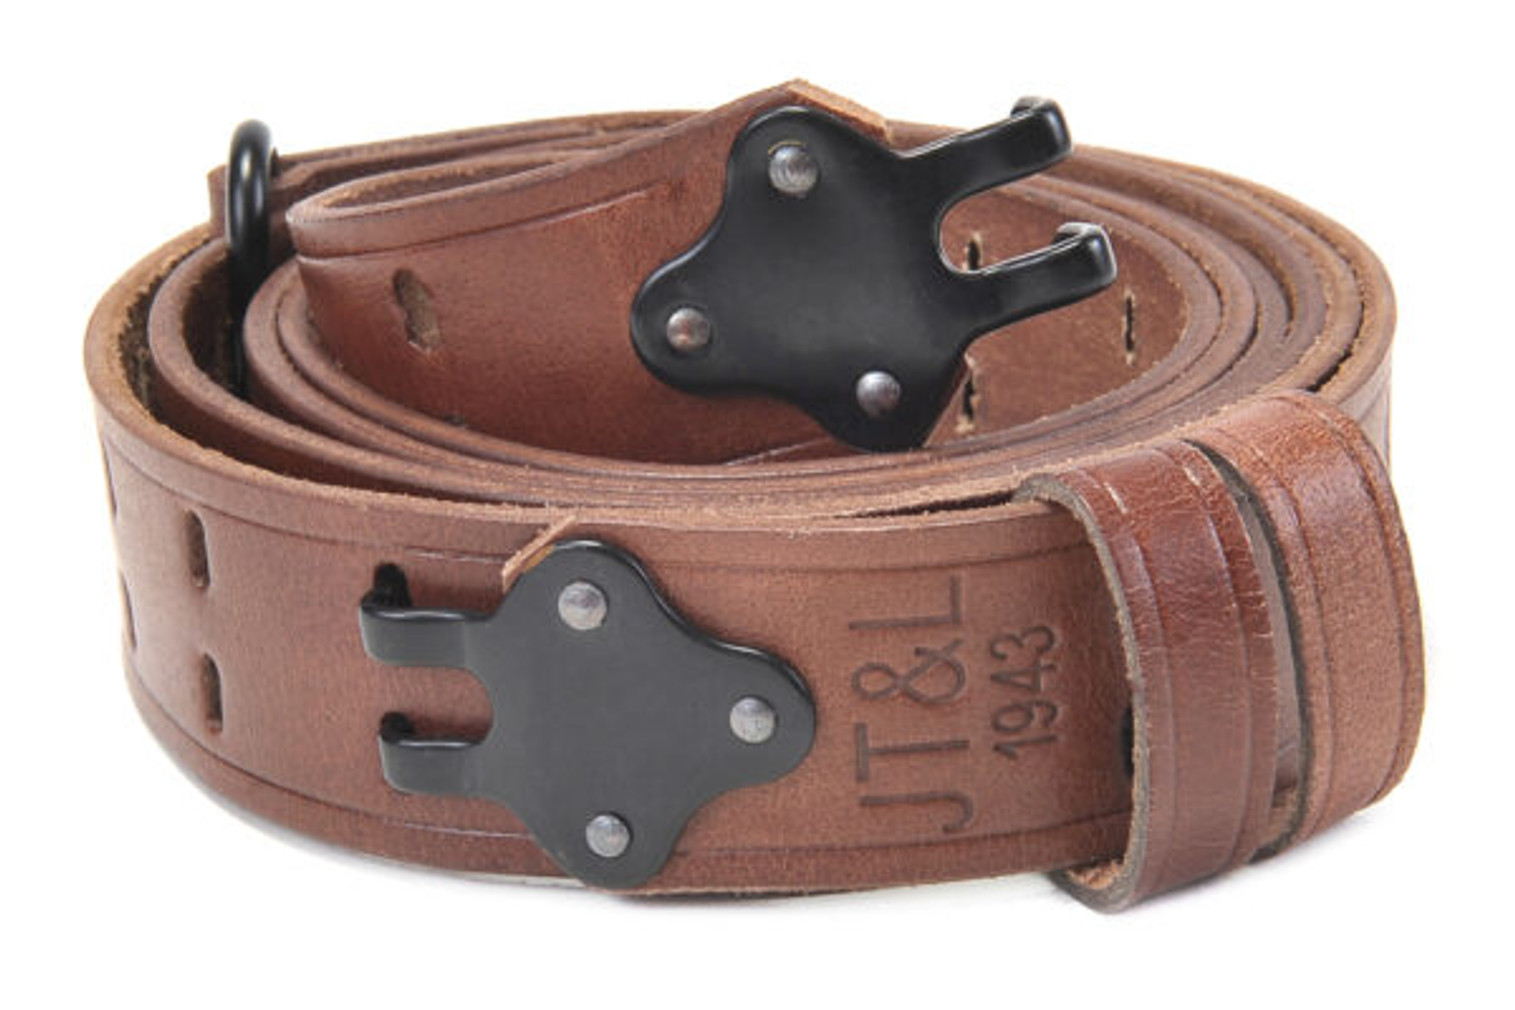 M1907 Leather Rifle Sling Dated 1943 Black Hardware M1 Garand Springfield Premium Drum Dyed Leather